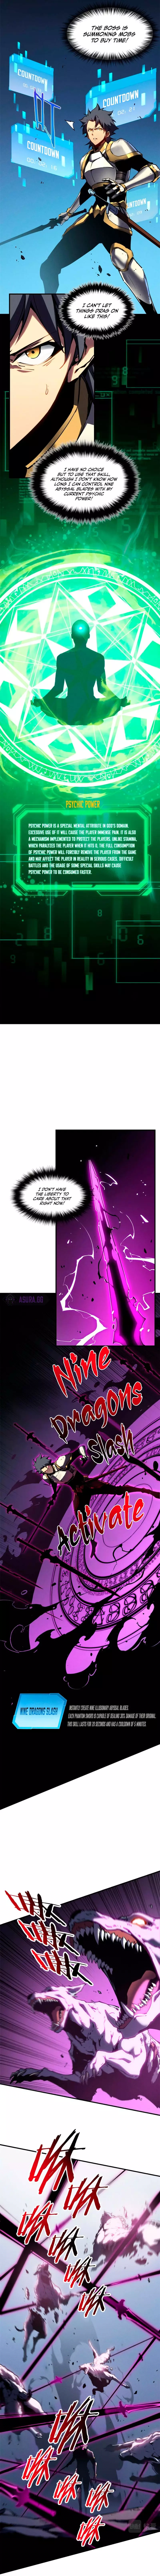 Rebirth Of The Strongest Sword God - 18 page 6-7825b739